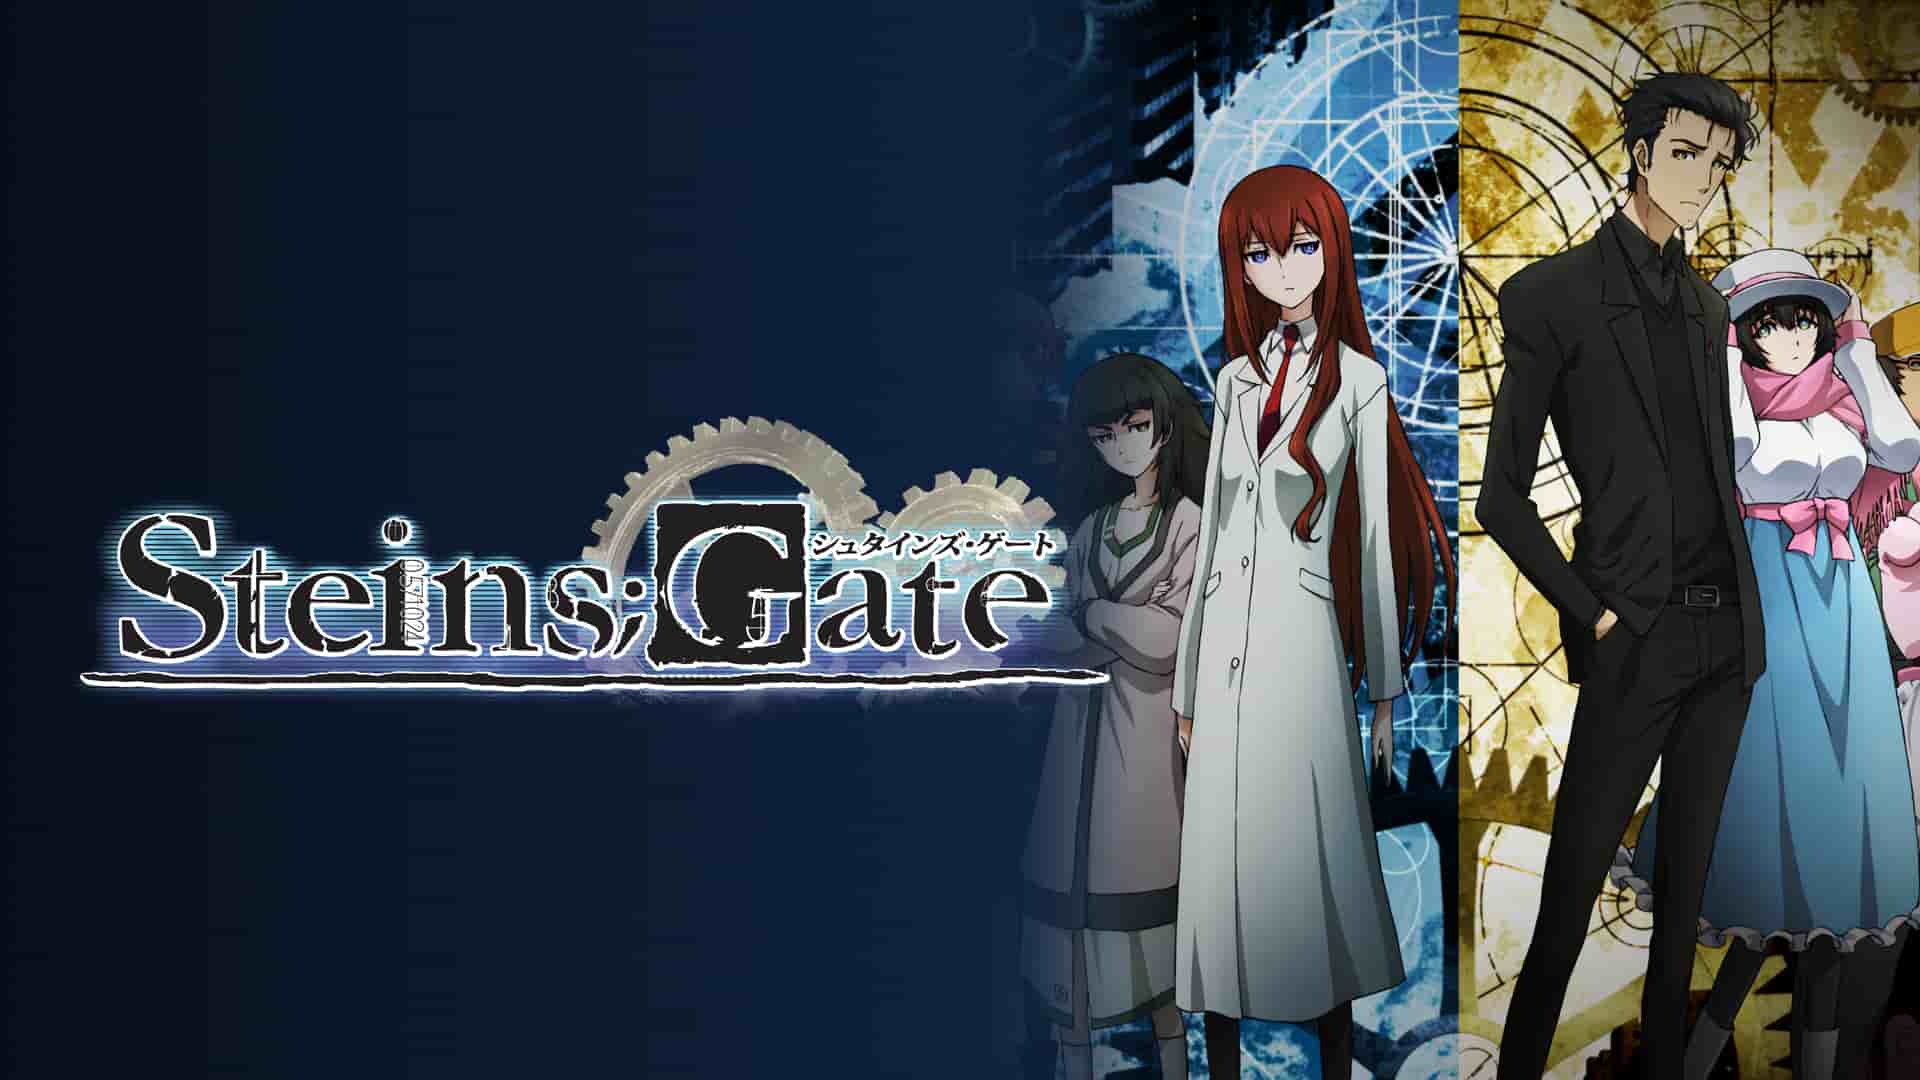 Title art for time travel anime show Steins;Gate